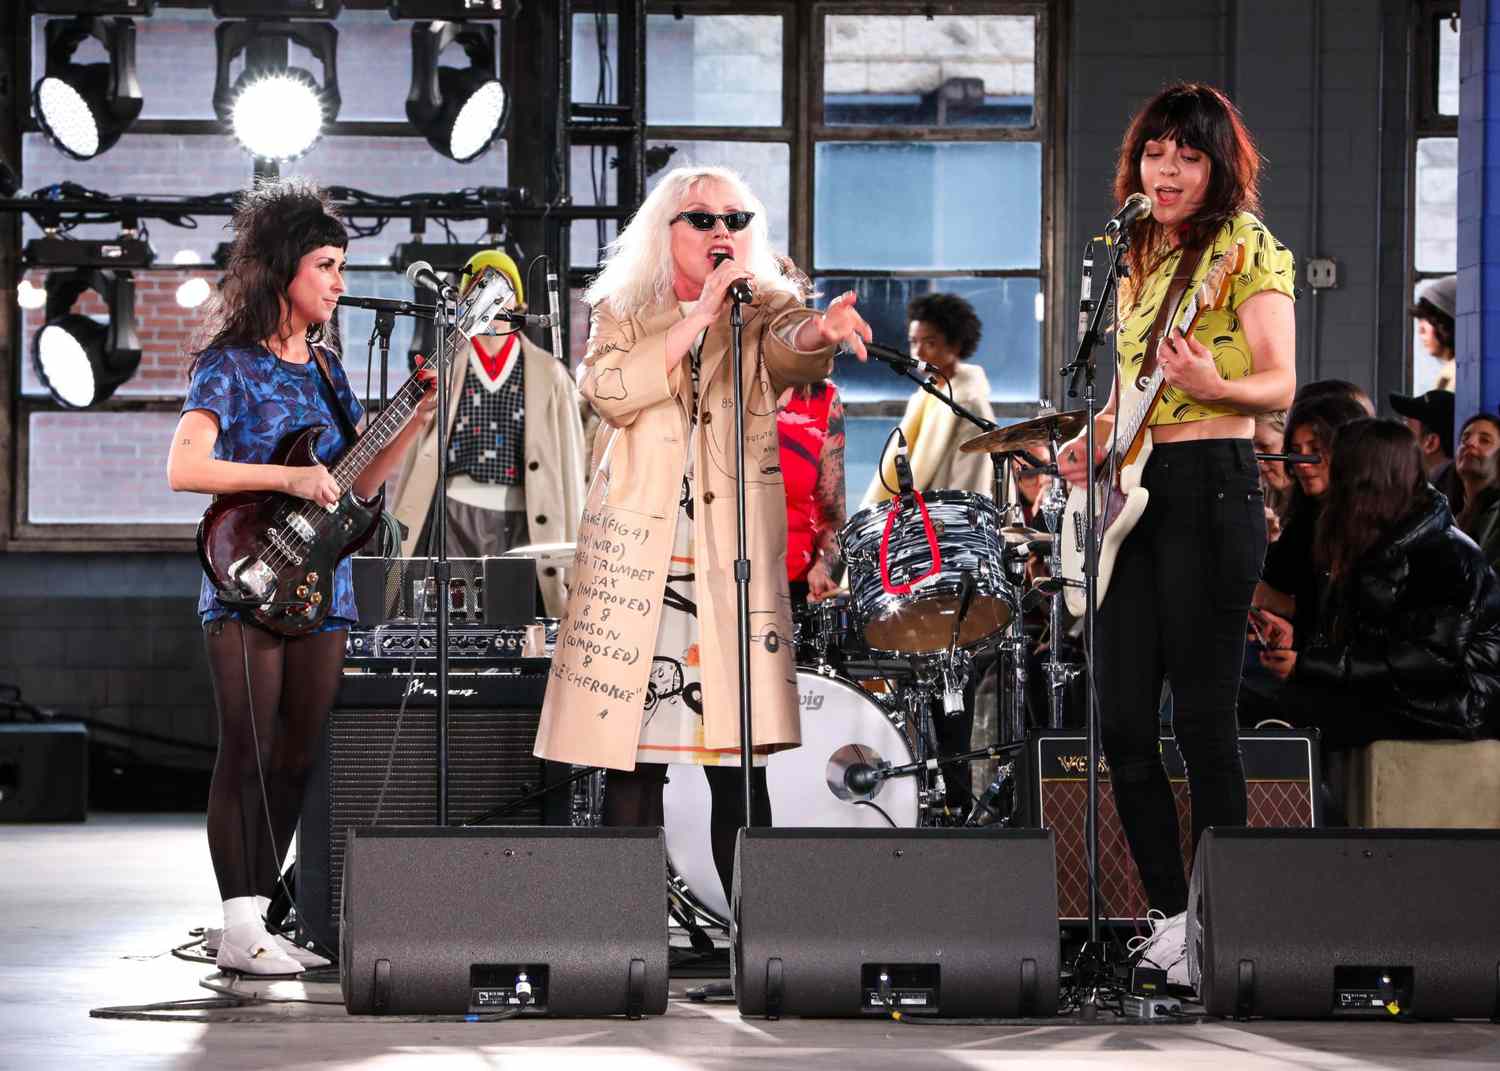 <p>For the finale, Debbie surprises show-goers by getting on the catwalk and putting on an electric performance with The Coathangers, with songs from her Blondie days.</p>
                            